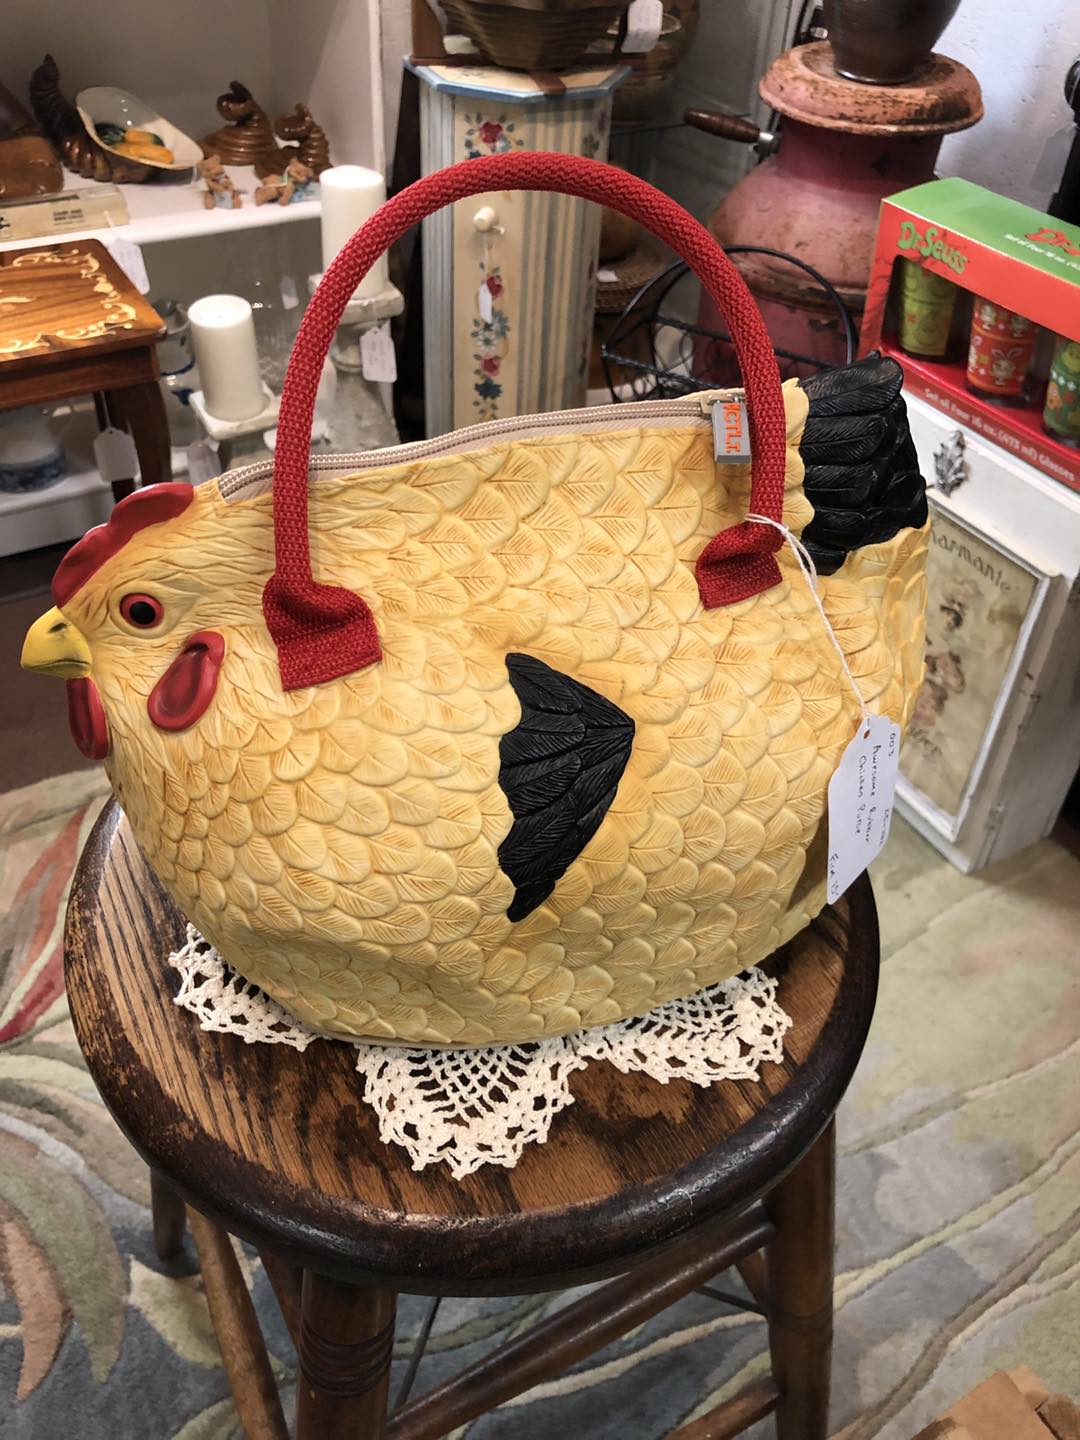 Scranberry Snapshots - Yes, yes it’s a rubber chicken purse! - Scranberry Coop - Vintage Store - Antiques, Collectibles, & More